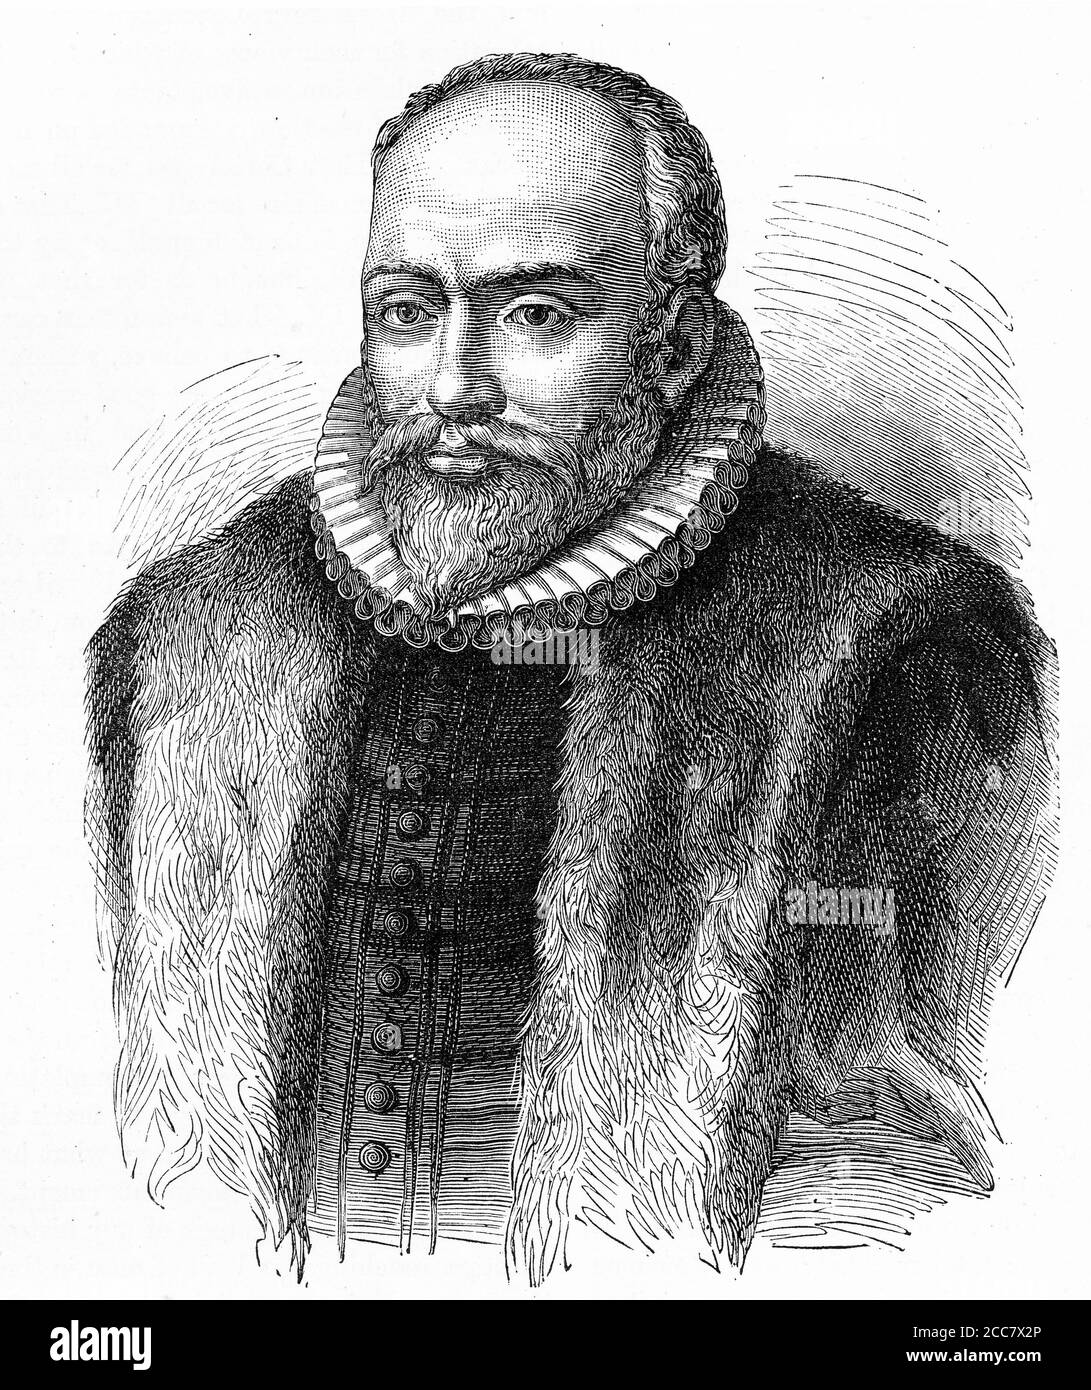 Engraving of Jacobus Arminius (1560 – 1609),  Dutch theologian from the Protestant Reformation whose views became the basis of Arminianism and the Dutch Remonstrant movement. He served from 1603 as professor in theology at the University of Leiden and wrote many books and treatises on theology, illustration from 'The history of Protestantism' by James Aitken Wylie (1808-1890), pub. 1878 Stock Photo